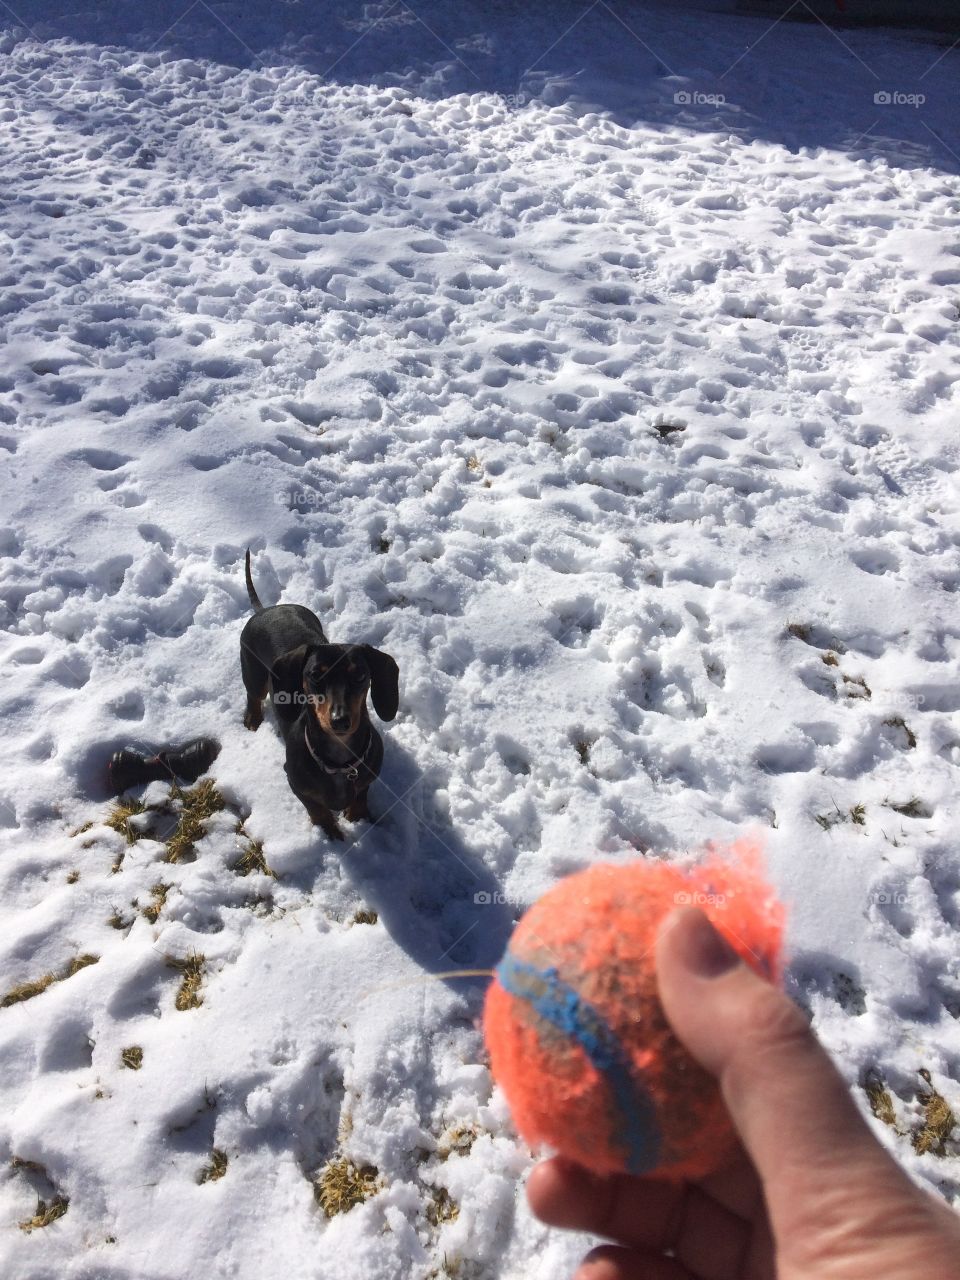 Ball time in the snow 